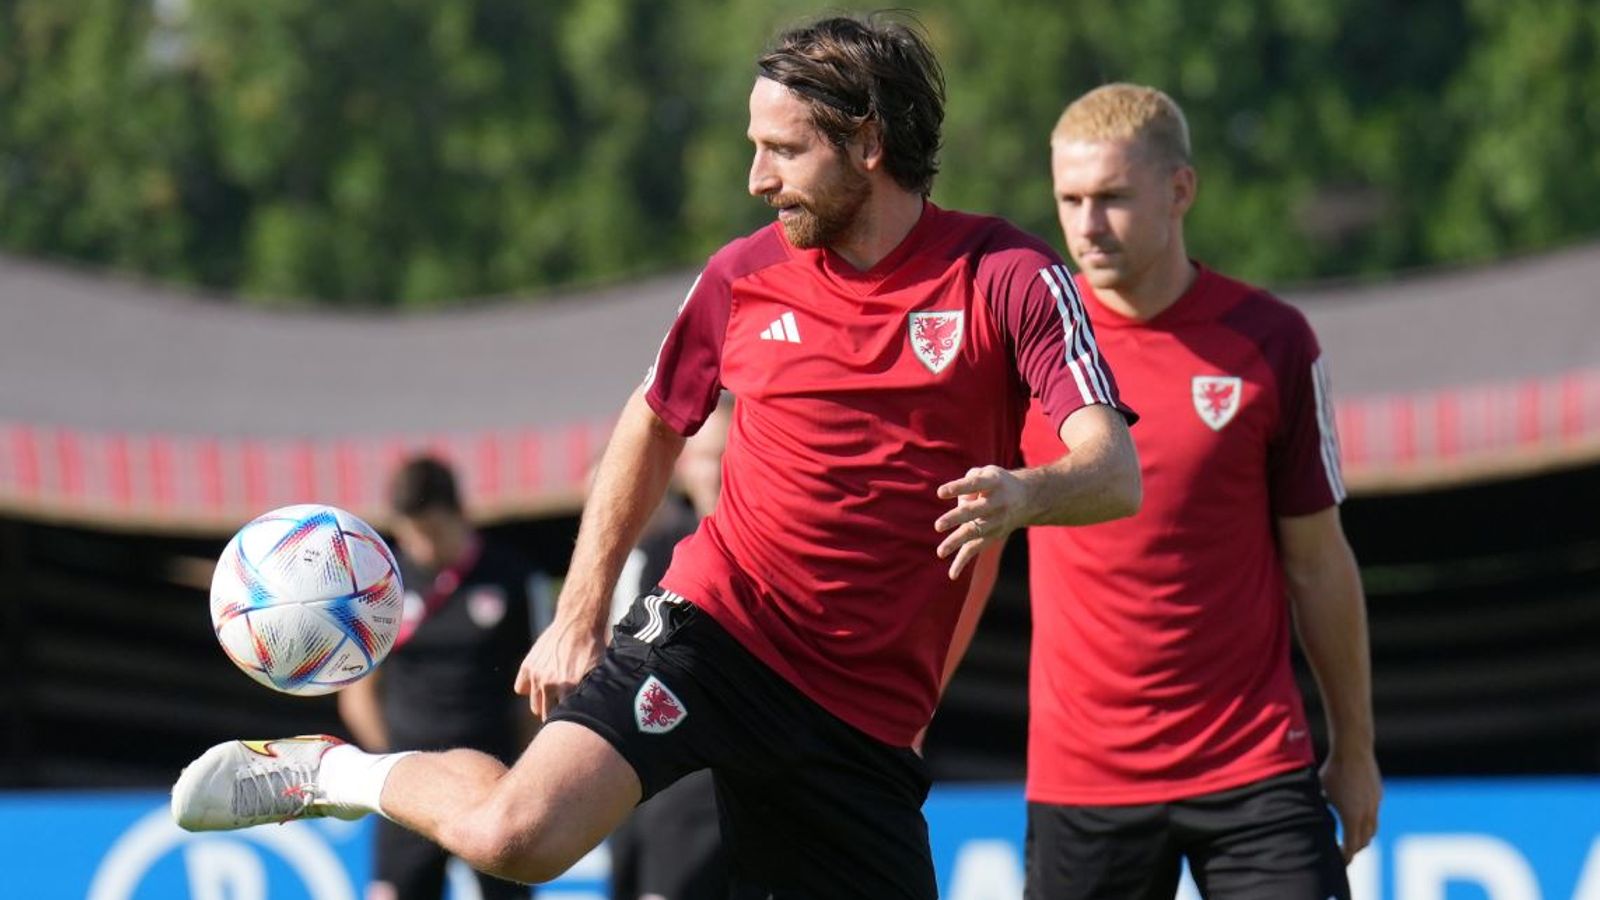 Wales midfielder Joe Allen fit and raring to go against Iran, confirms boss Rob Page